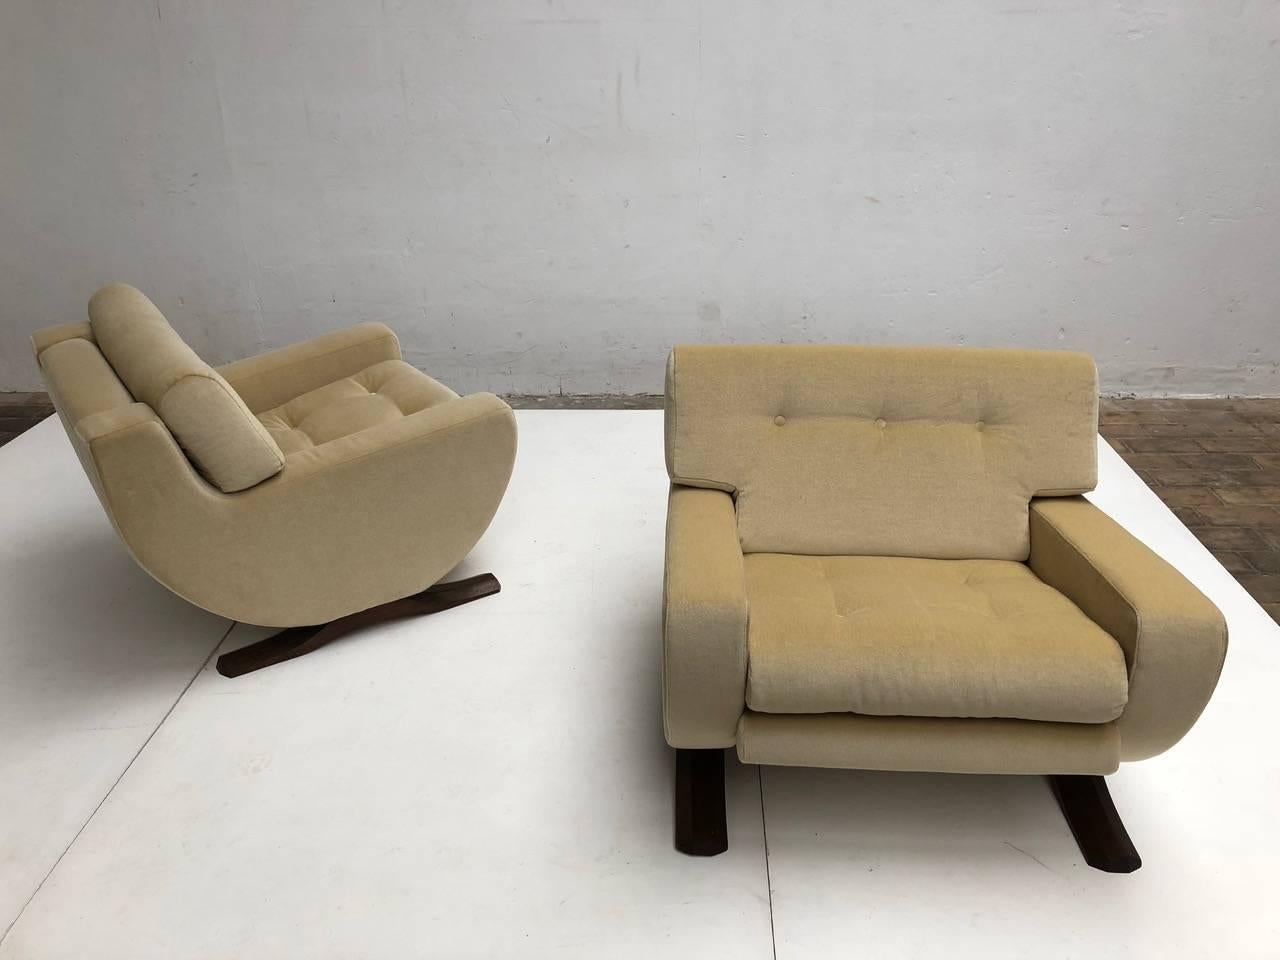 Rare and beautiful pair of lounge chairs by italian sculptor and artist Franz T Sartori for Flexform, Milan Italy, circa 1965. Sartori is best known for his organic form sculptors but he also had a brief foray into designing furniture which also